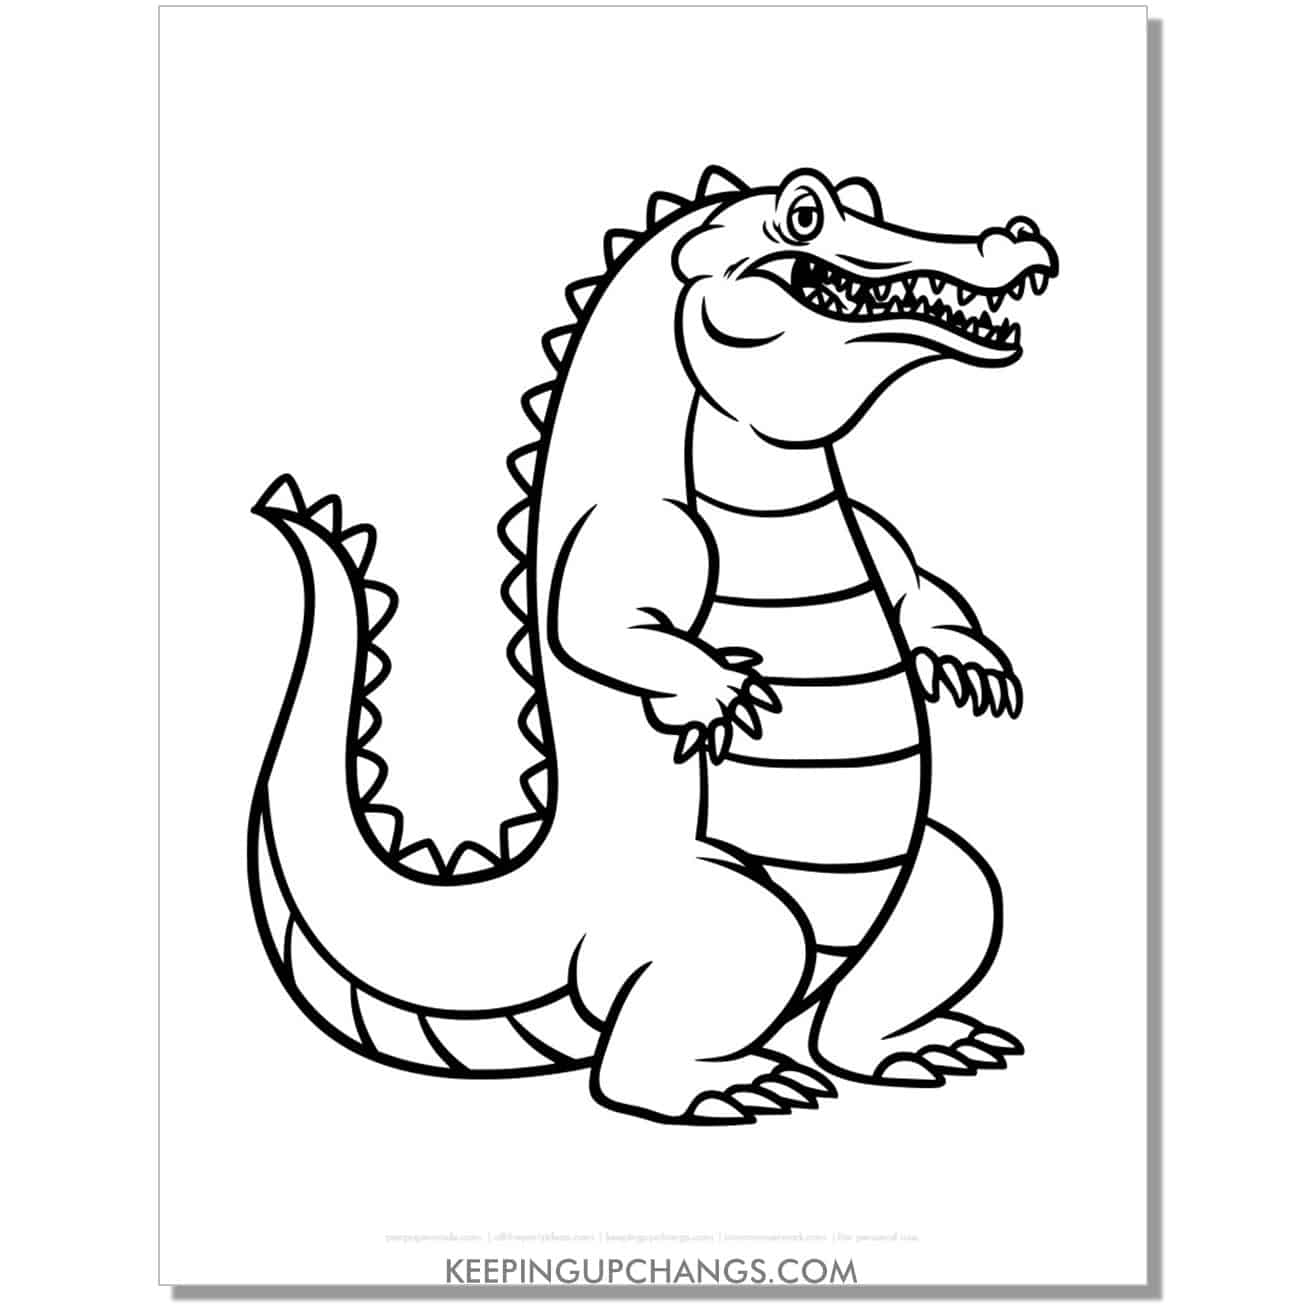 free alligator, crocodile facing right coloring page, sheet.